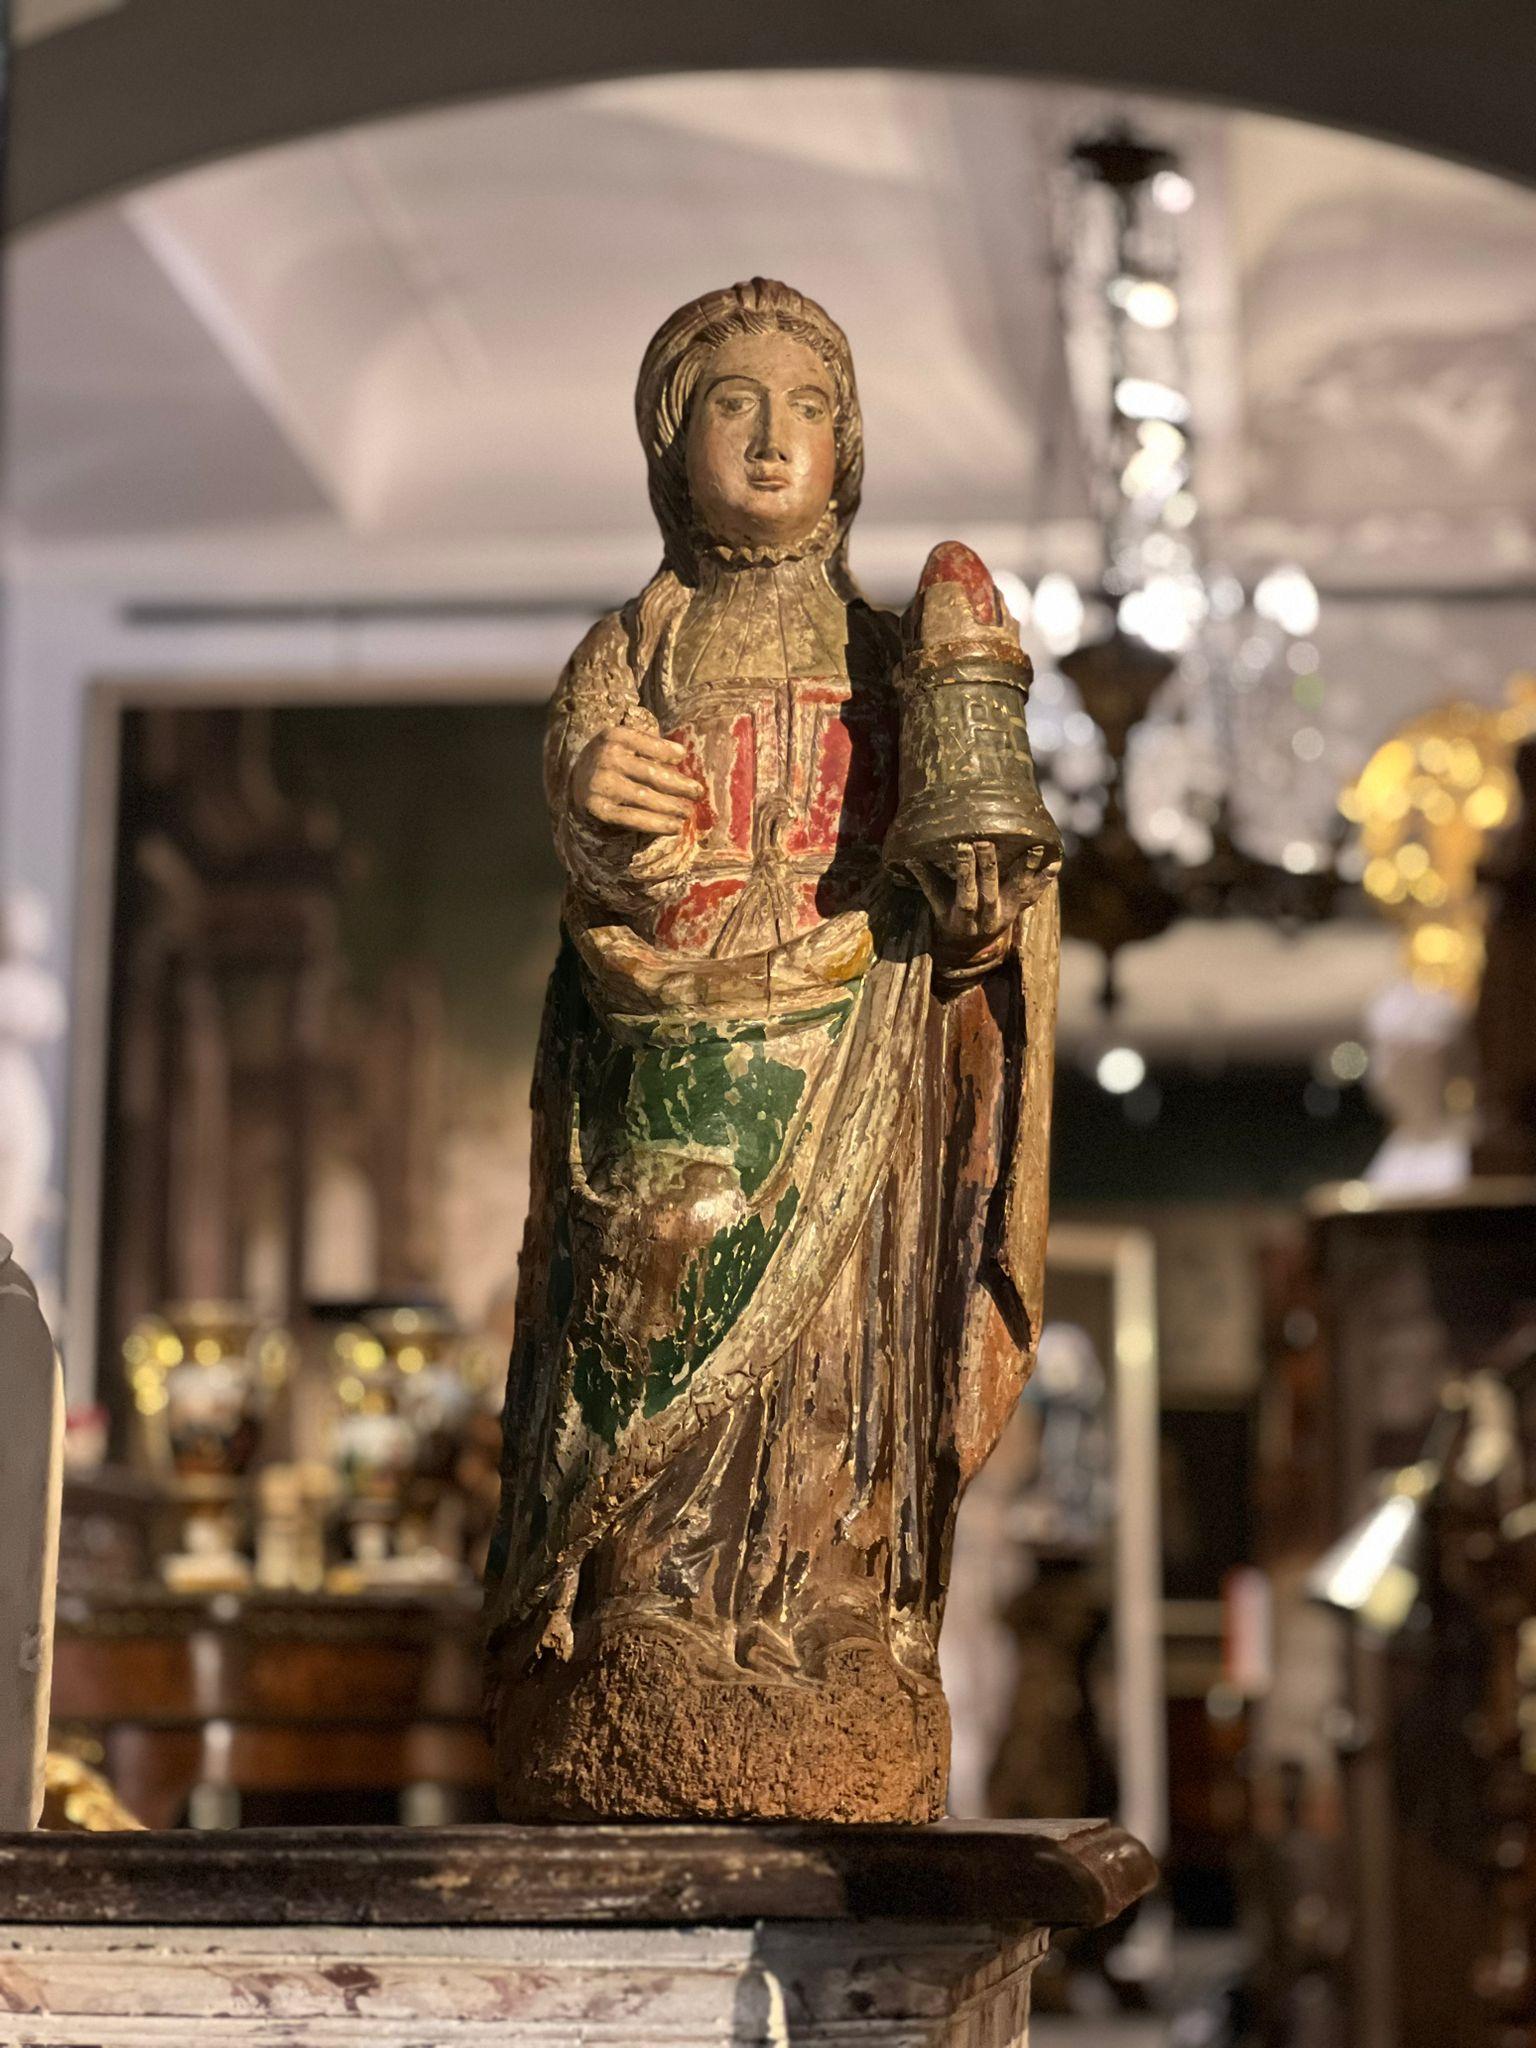 Rare polychrome wooden sculpture depicting Saint Barbara, 15th century, France.

Saint Barbara is a saint venerated in the Christian tradition, known for her history and legend. She is often depicted with a tower, as it is associated with protection